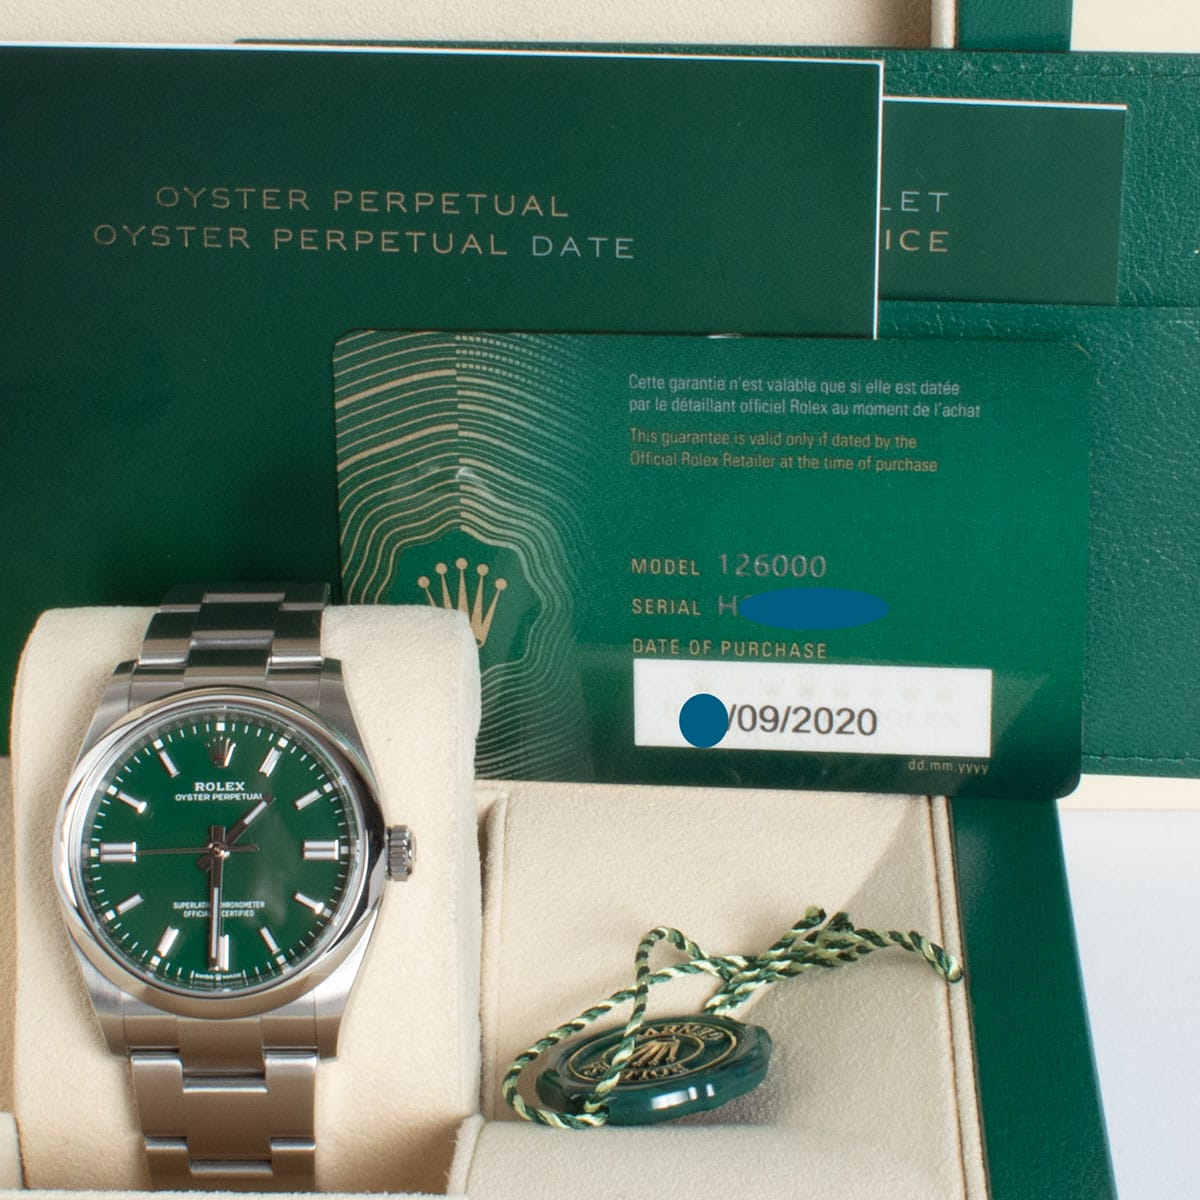 View in Box of Oyster Perpetual 36